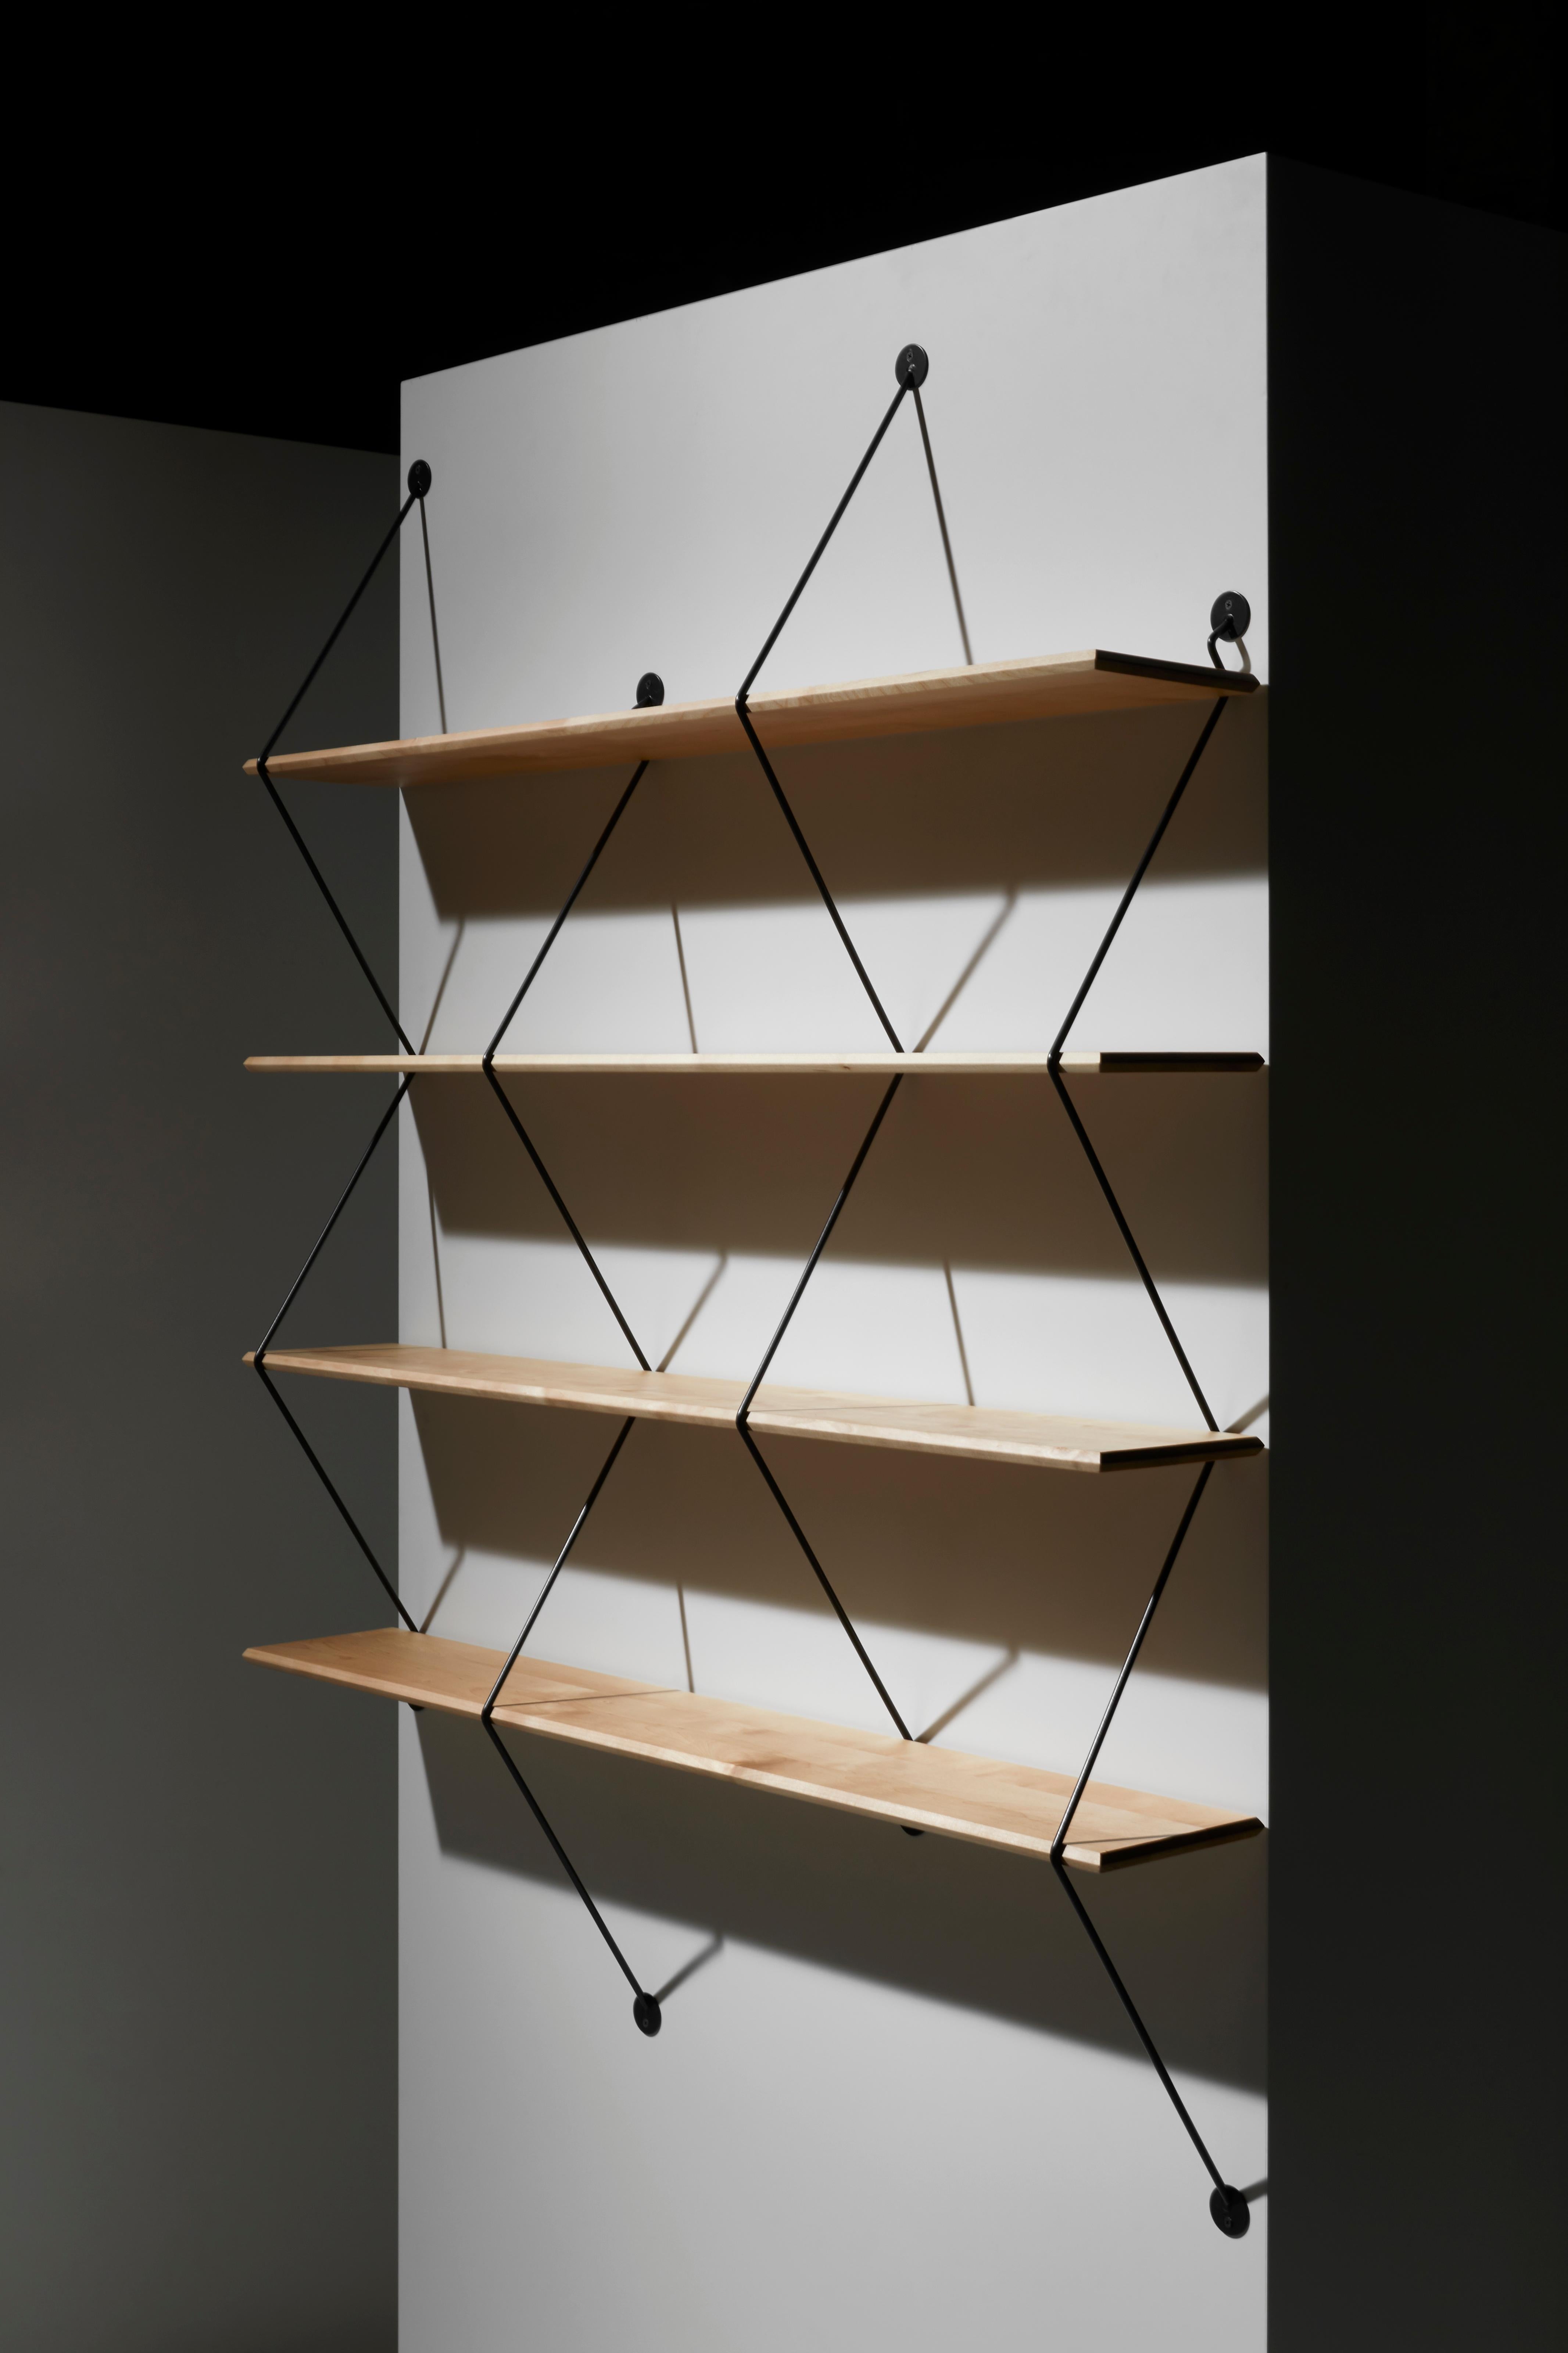 Climb is an ingenious shelving system made of beveled wooden boards supported by metal wires. Measure: 120cm.
The design plays with the sensation of tension of the wires that grasps the wooden shelves and becomes a rigid structure as the product is